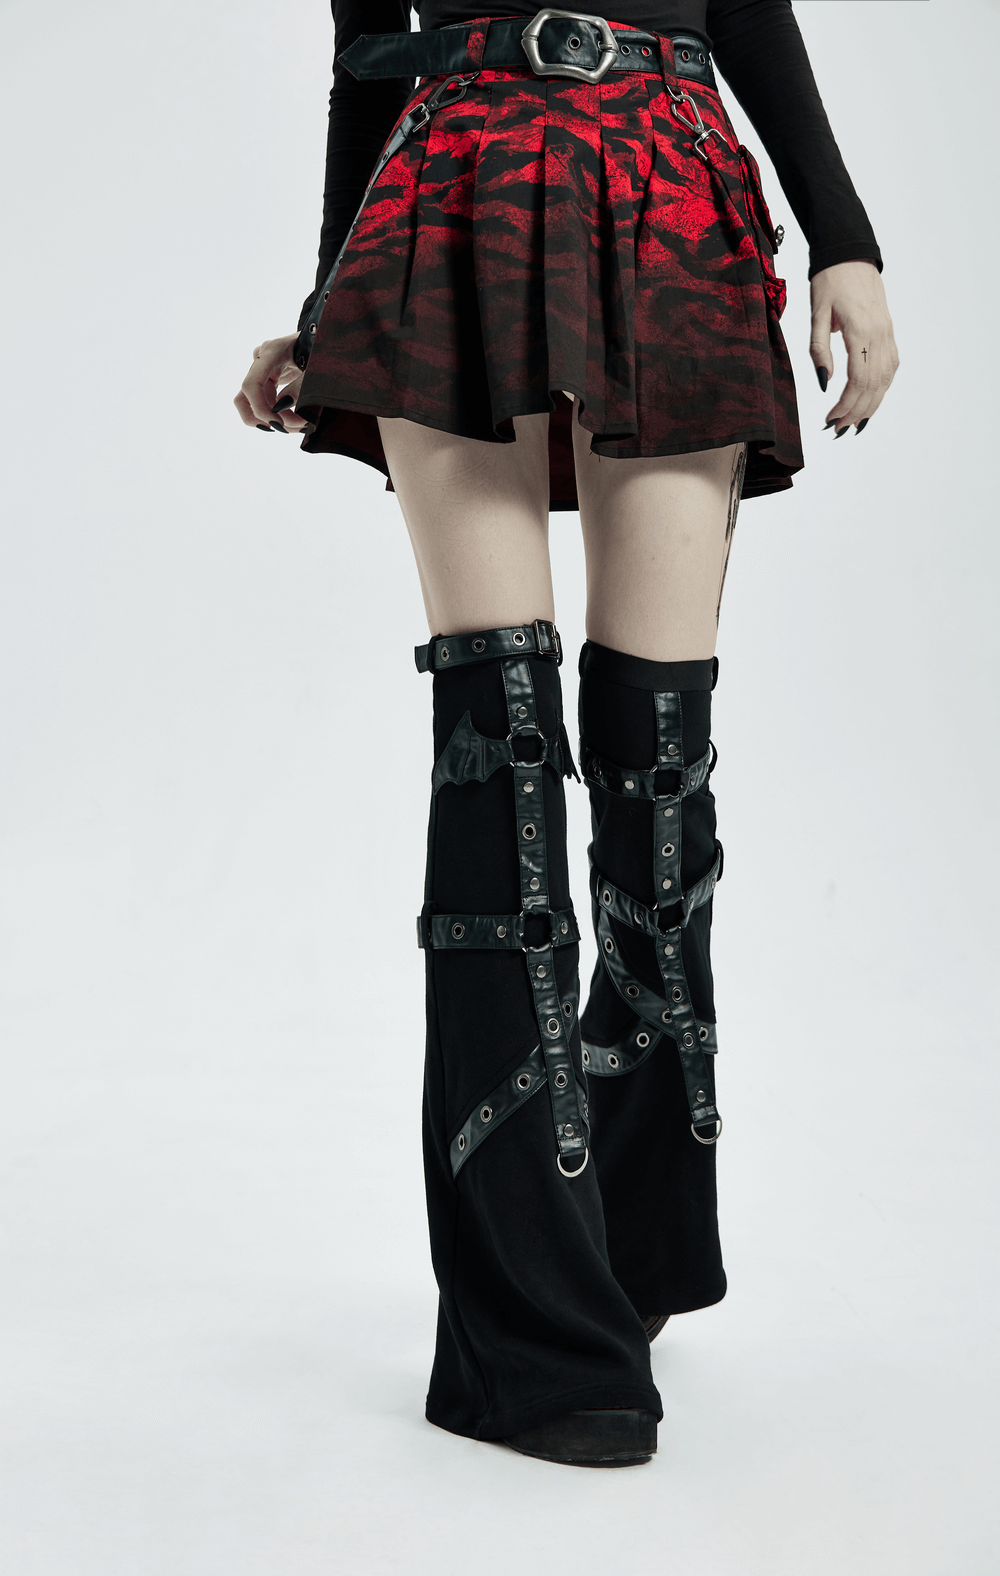 Punk-Styled Flared Leg Sleeves with Flame Print and Bat Detail